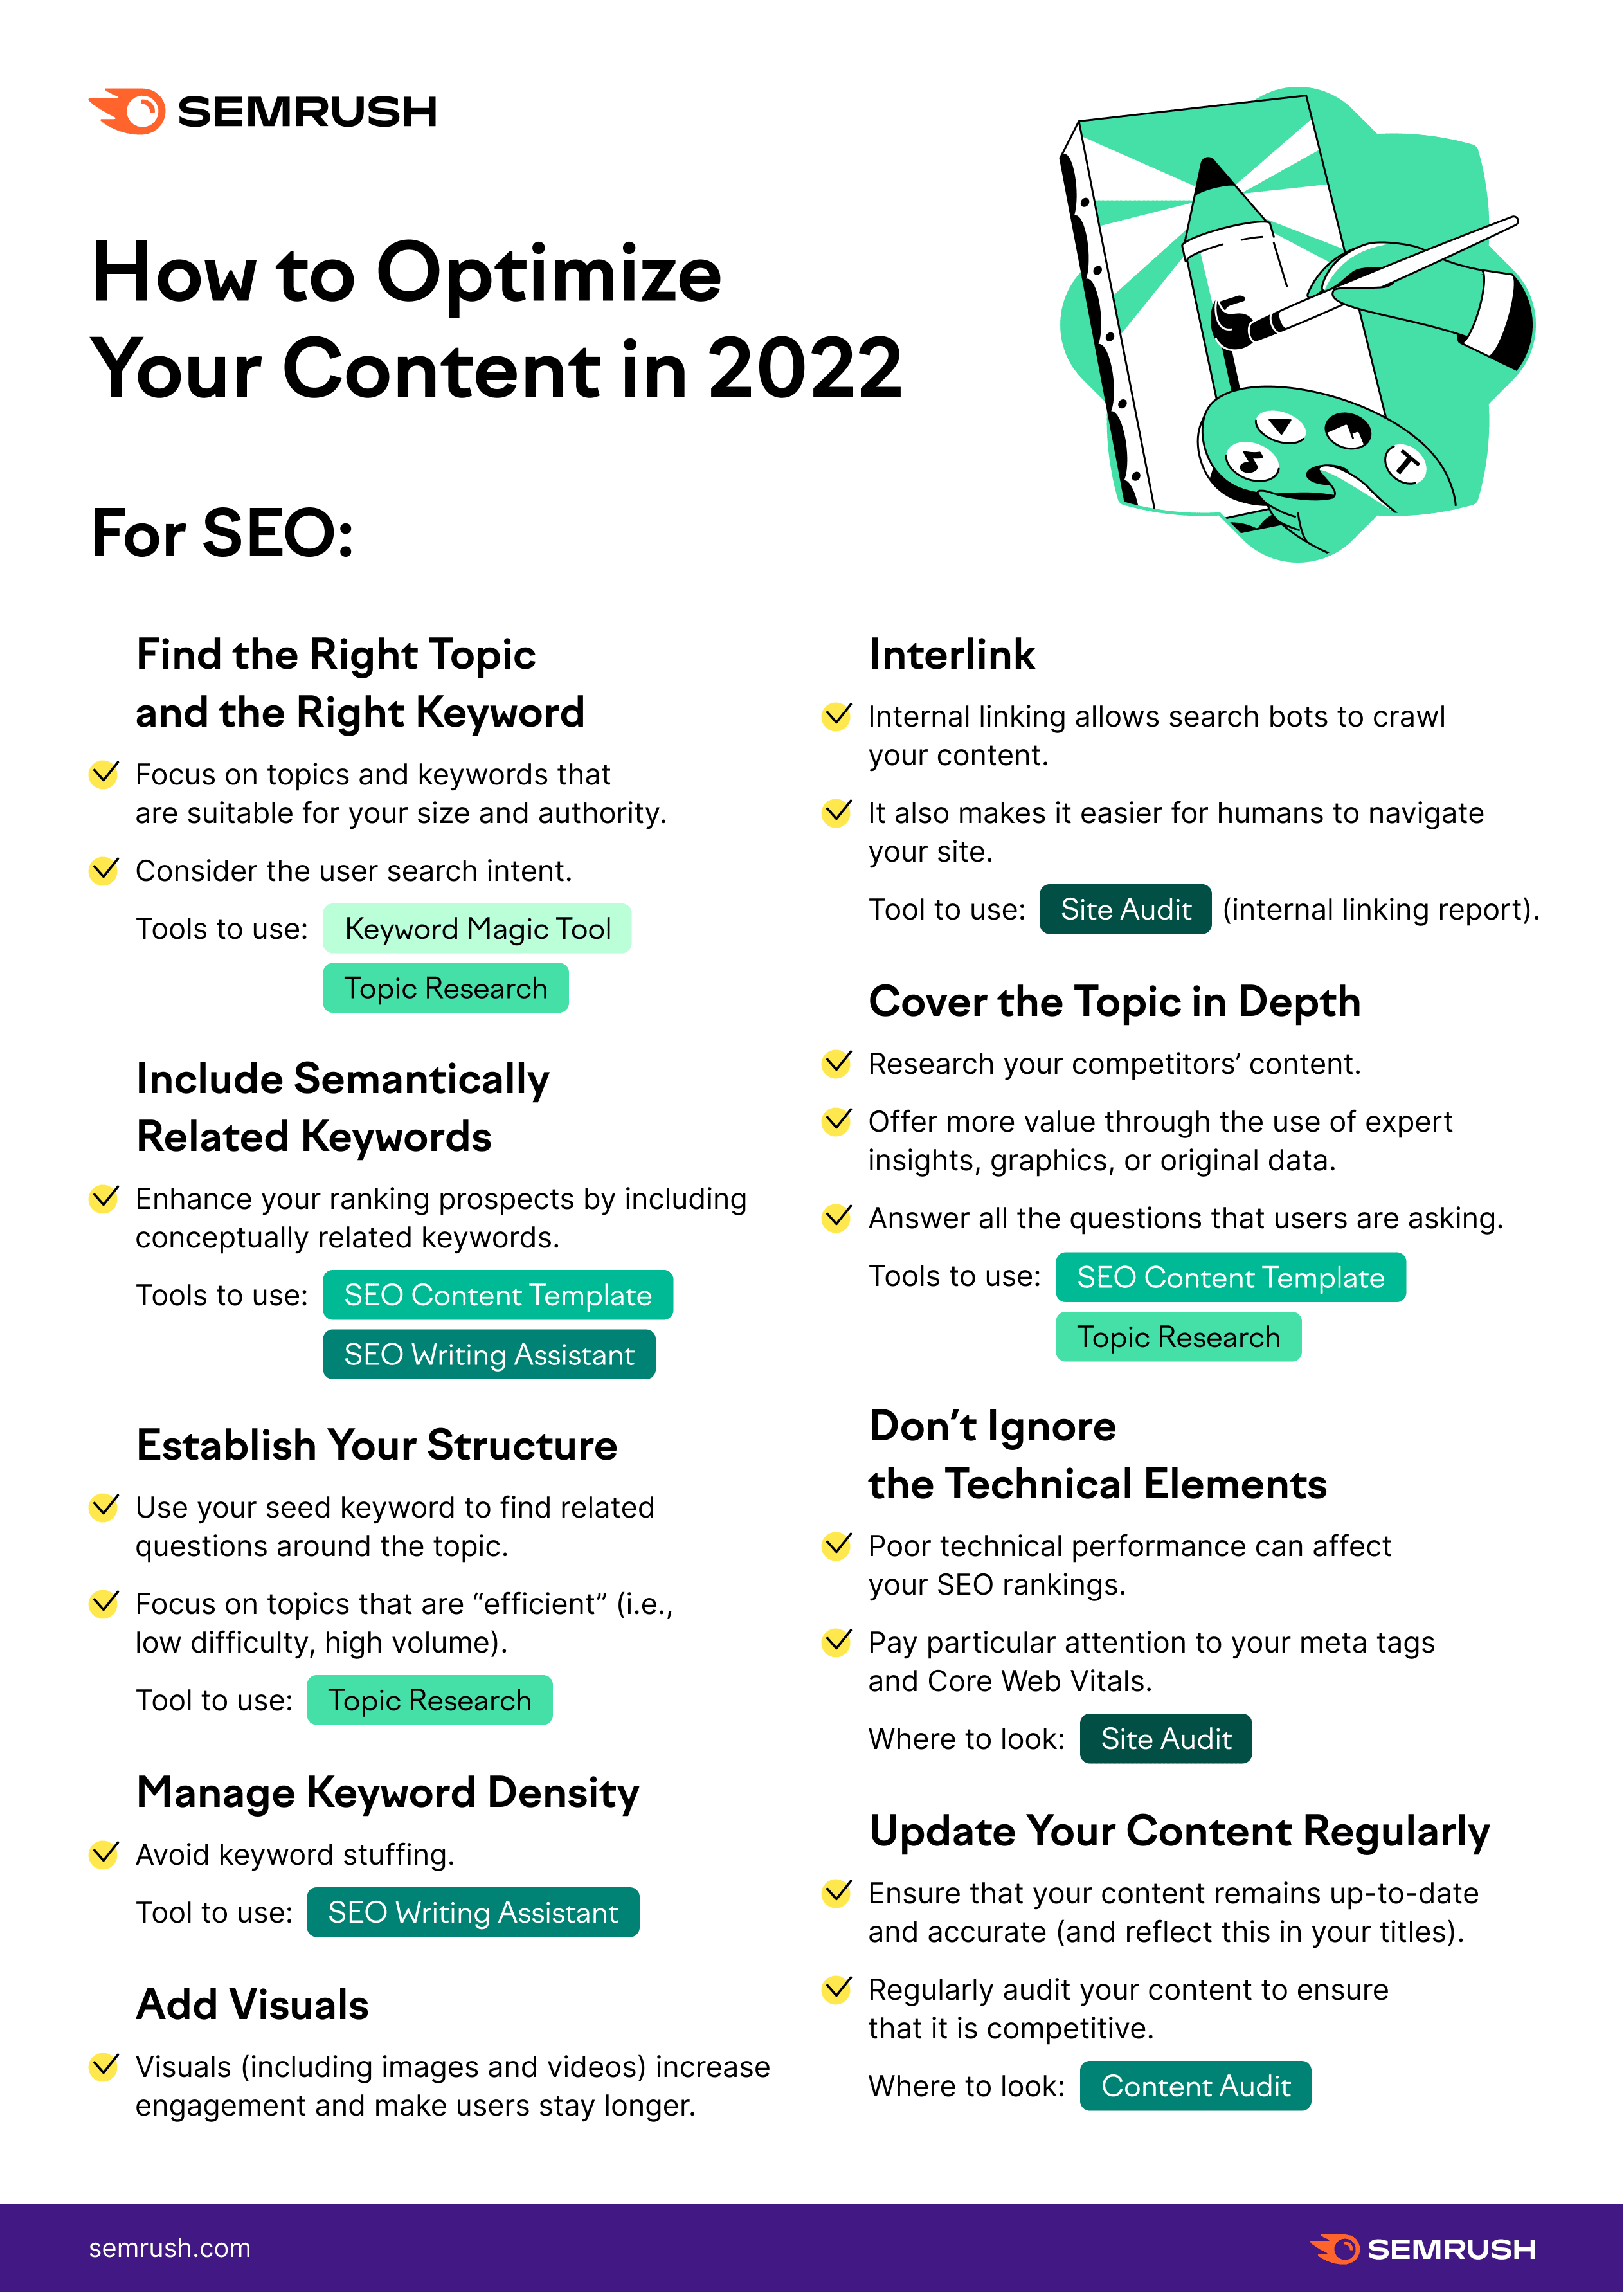 How to Optimize your Content